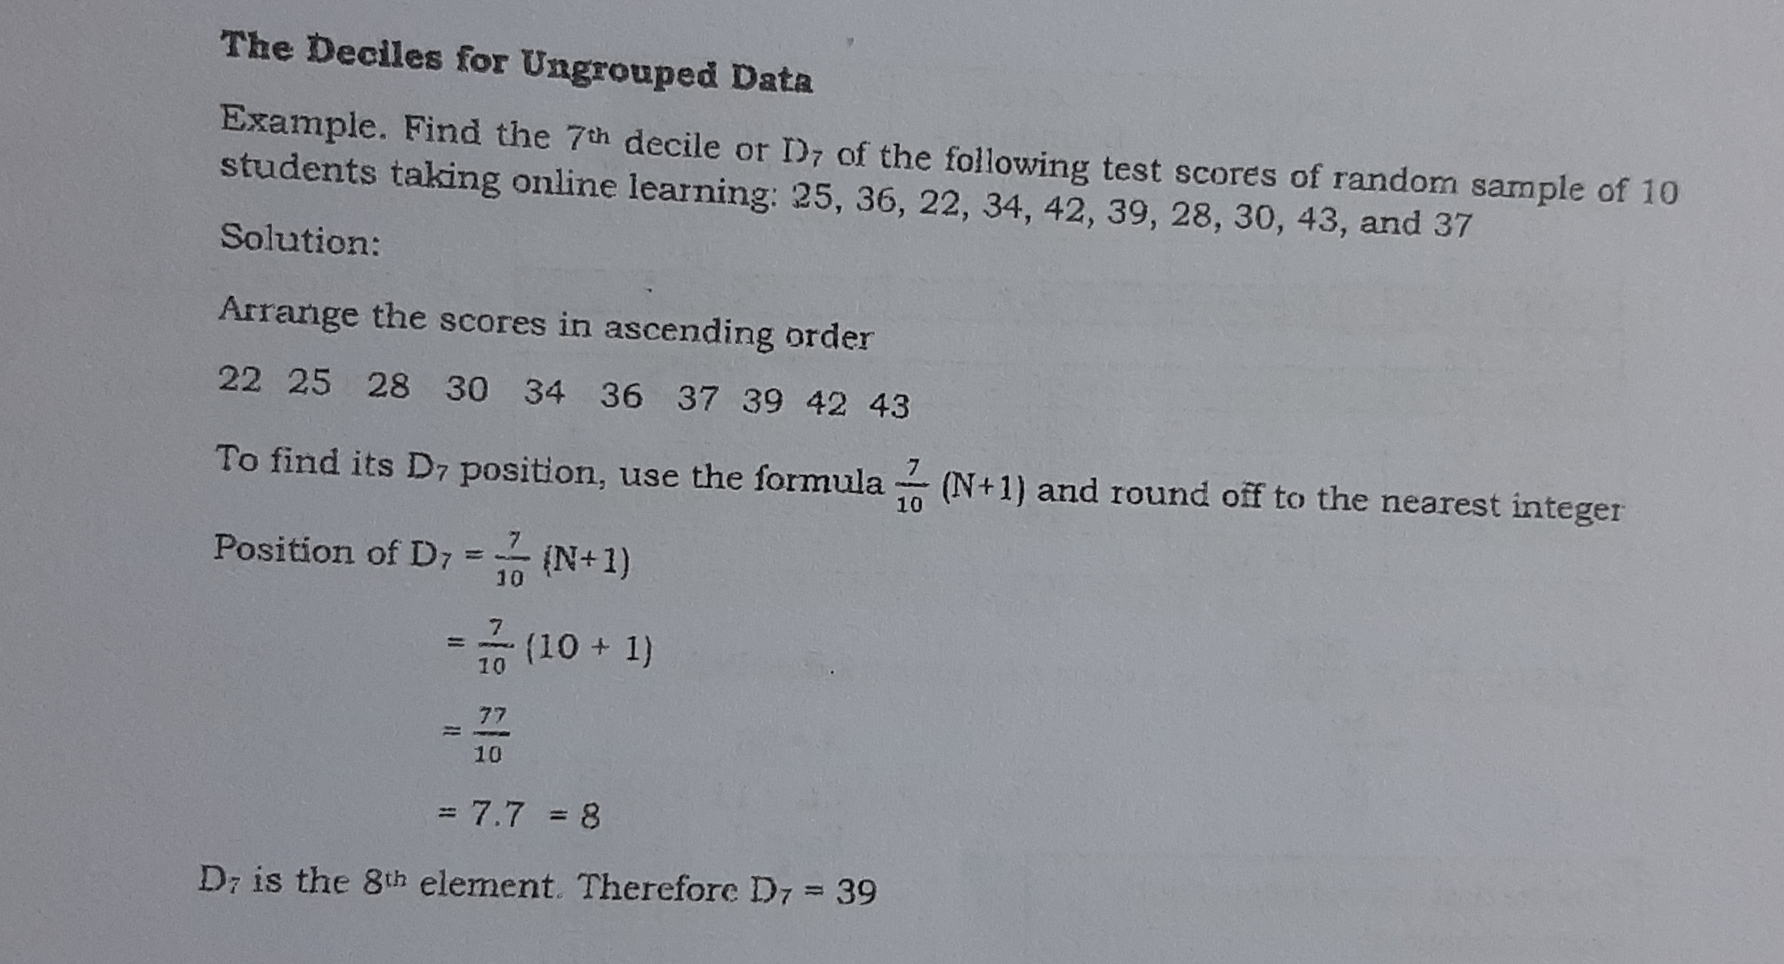 The Deciles for Ungrouped Data Example. Find the 7th decile or D7 of the following test scores of random sample of 10 students taking online learning: 25, 36, 22, 34, 42, 39, 28, 30, 43, and 37 Solution: Arrange the scores in ascending order 22 25 28 30 34 36 37 39 42 43 To find its D7 position, use the formula 7/10 N+1 and round off to the nearest integer Position of D_7= 7/10 N+1 = 7/10 10+1 = 77/10 =7.7 = 8 D is the 8tth element. Therefore D_7=39